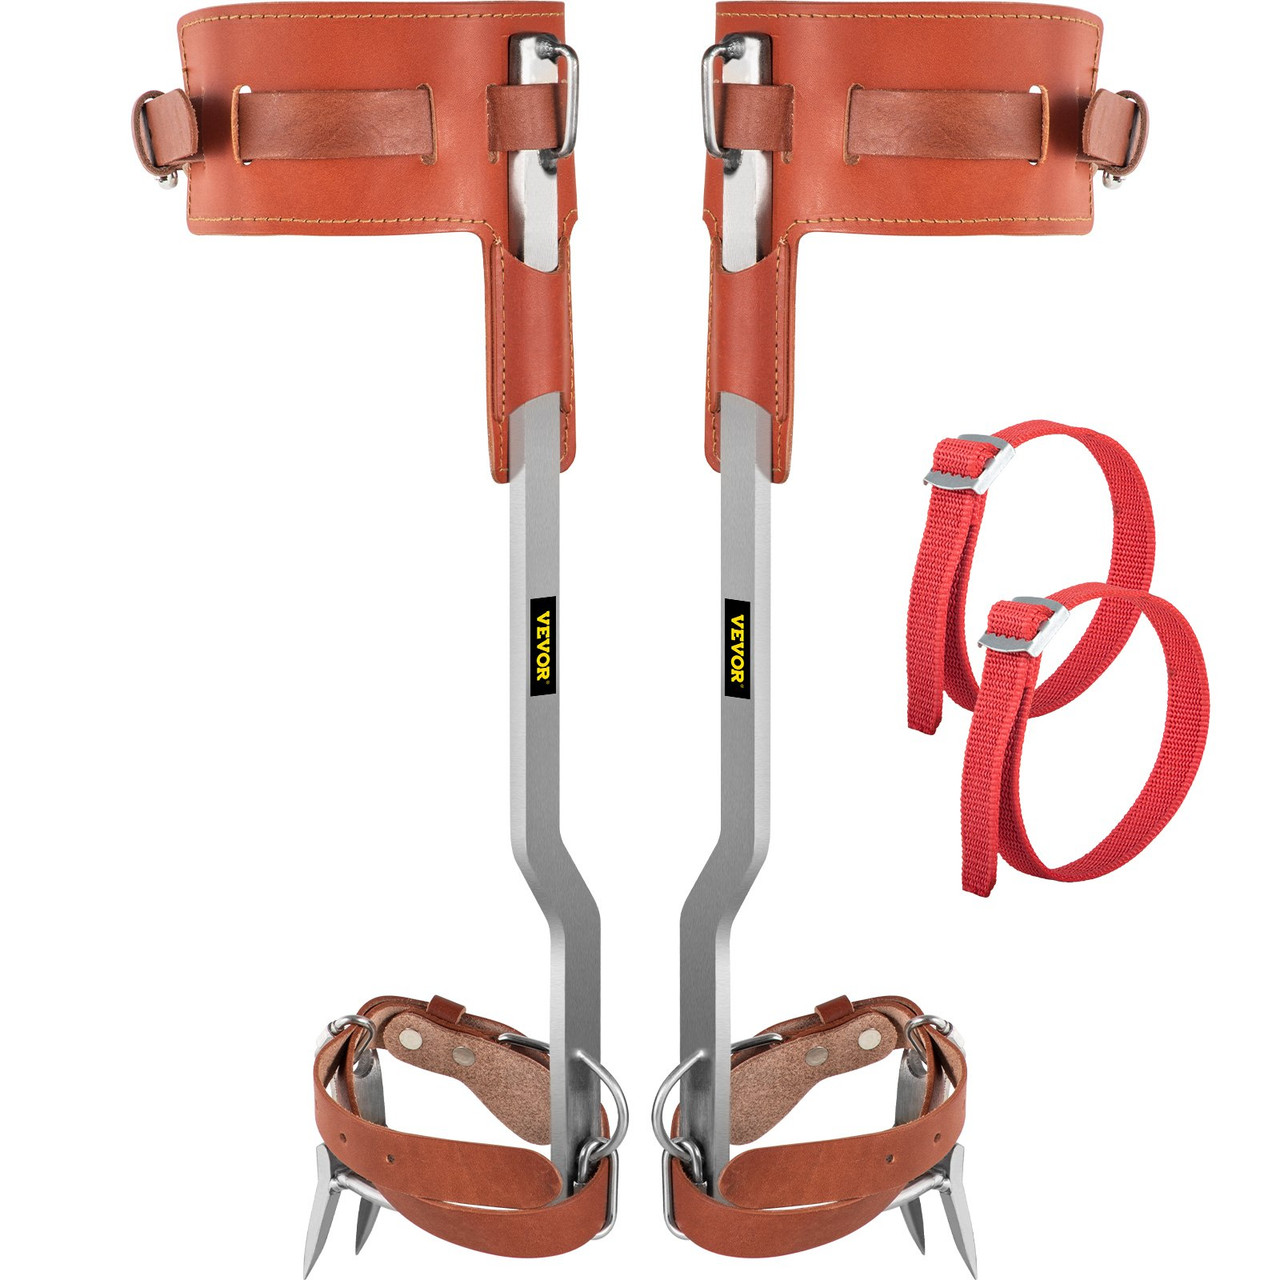 Tree Climbing Spikes, 1 Pair Stainless Steel Pole Climbing Spurs, w/Adjustable Straps and Cow Leather Padding, Arborist Equipment for Climbers,